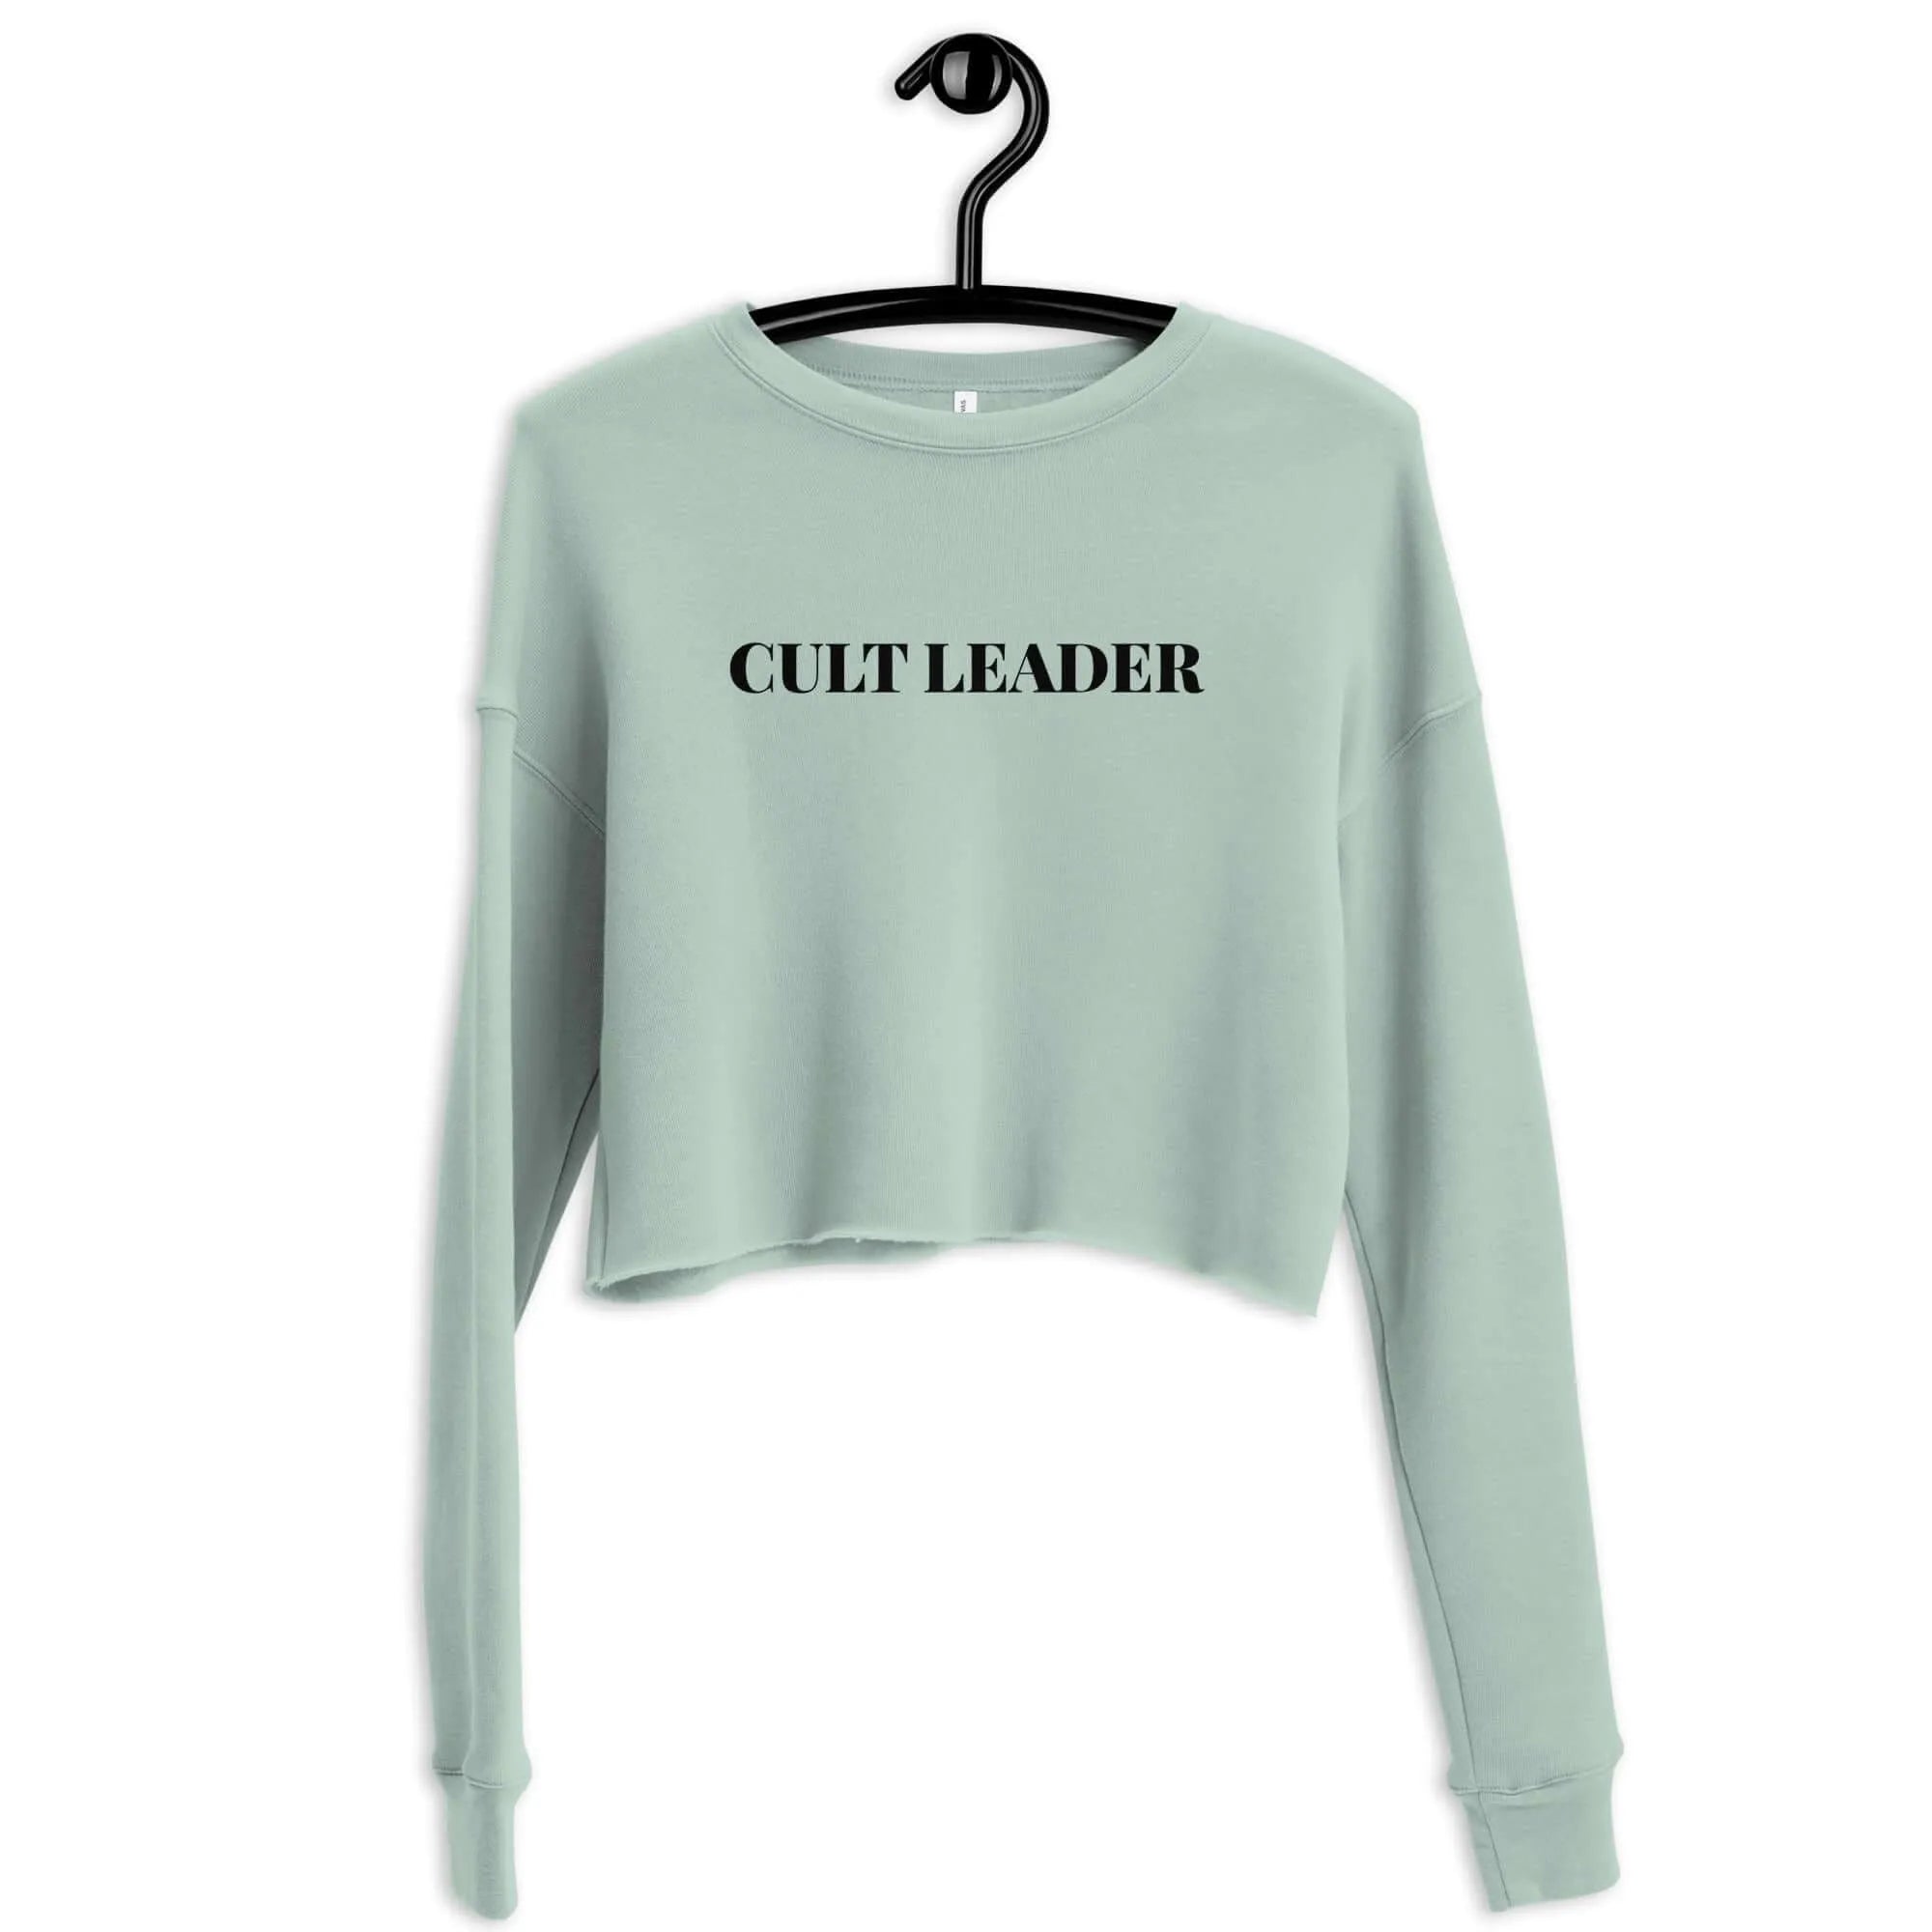 Cult Leader Crop Sweatshirt Witchy girl power feminist vibes 